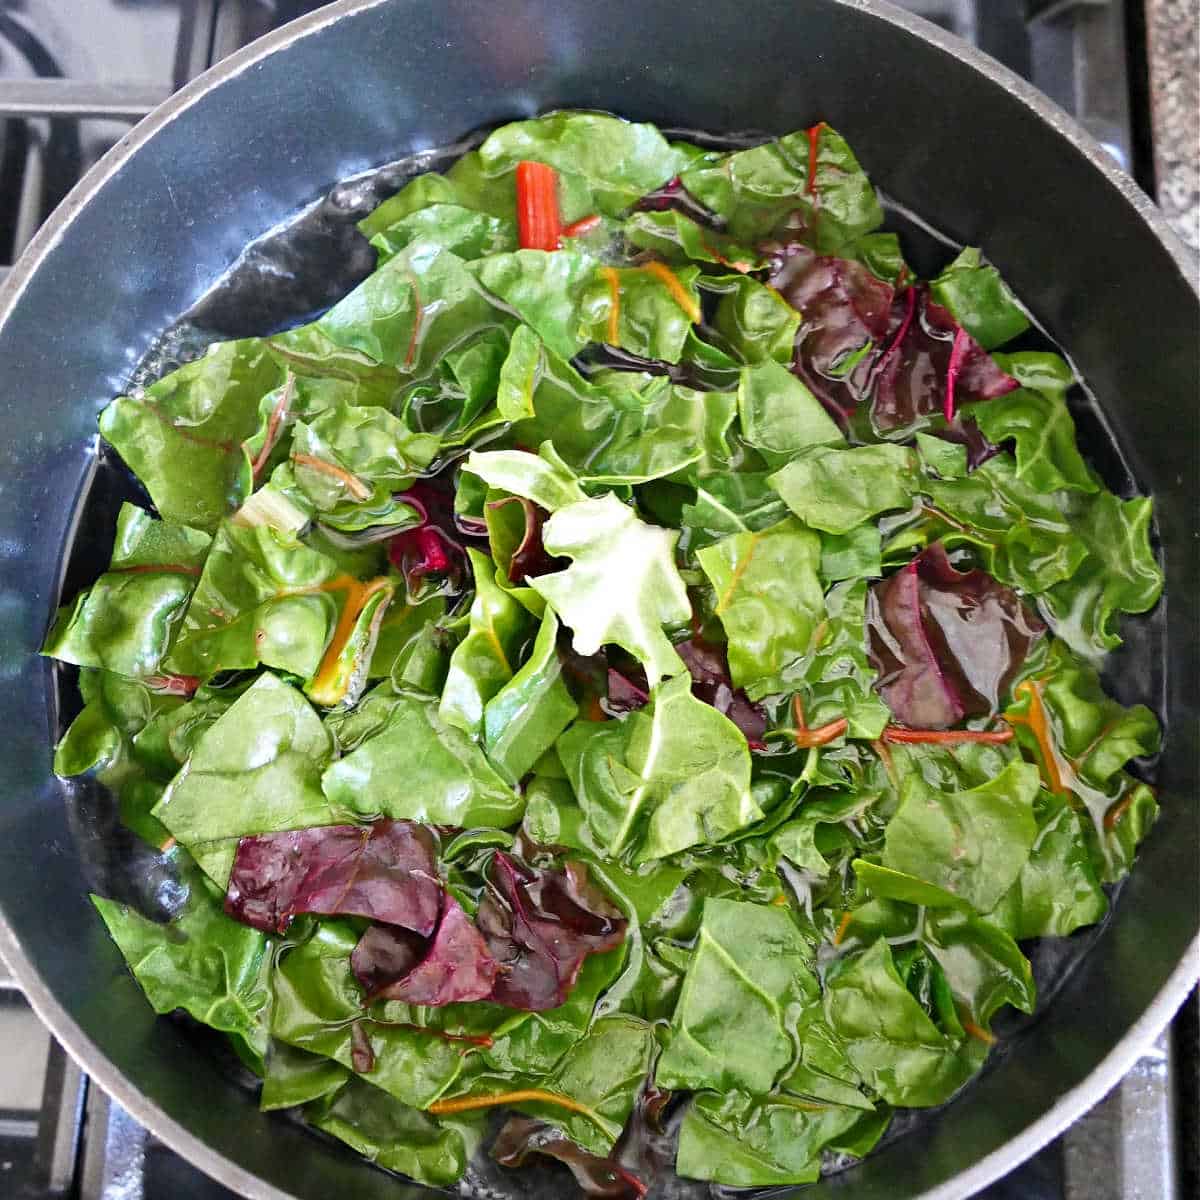 chard leaves being blanched in a pot of boiling water on the stove